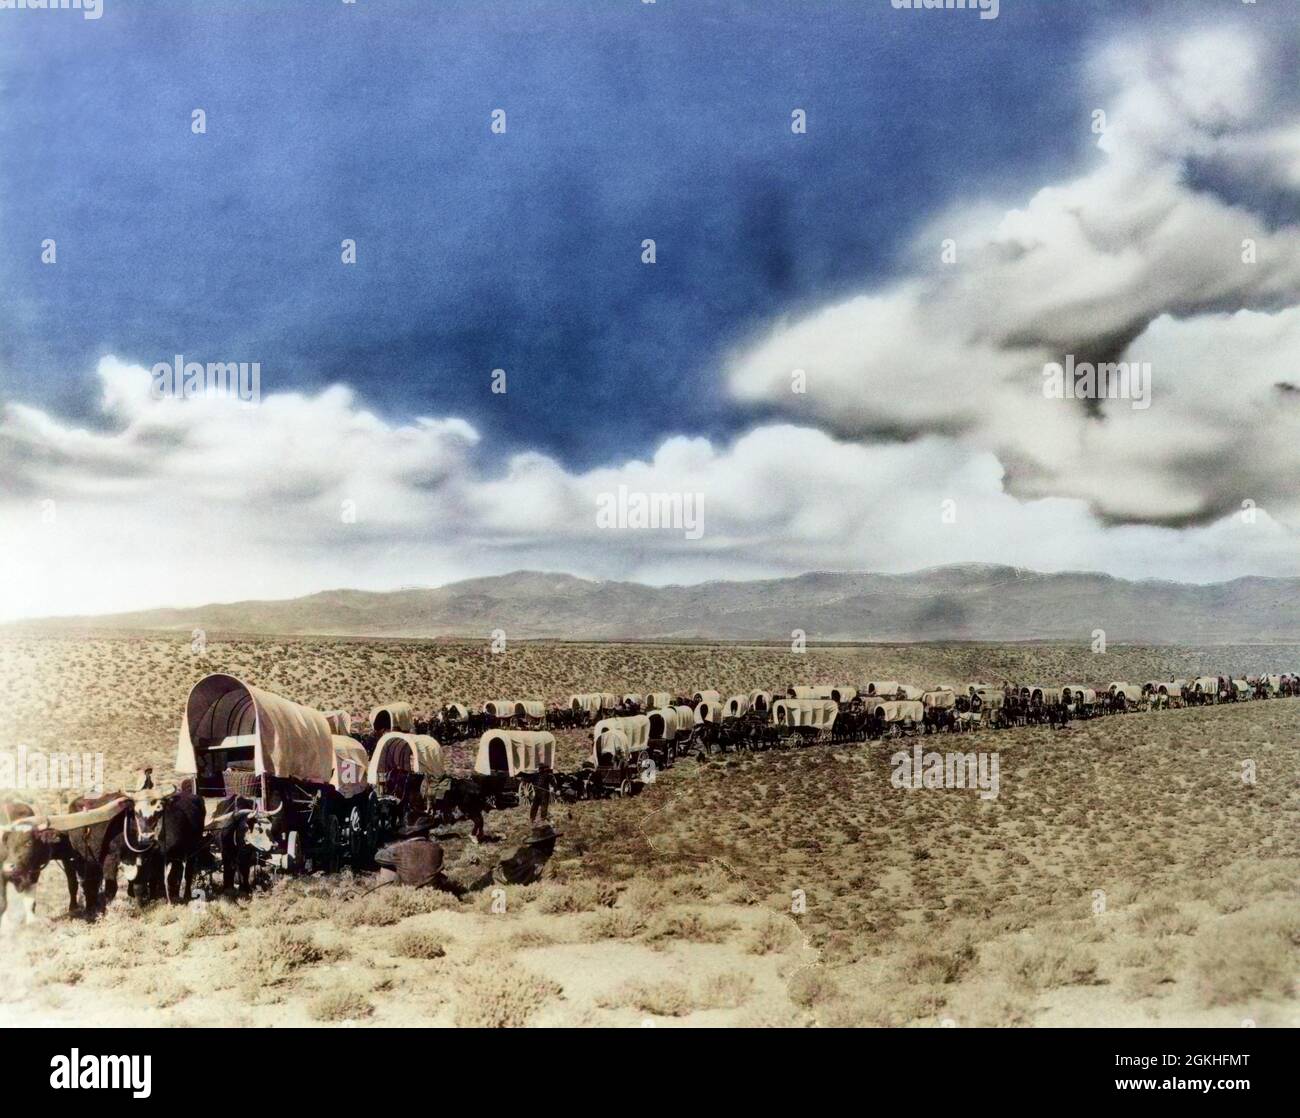 1870s 1880s MONTAGE OF LONG LINES OF COVERED WESTERN LAND SETTLERS AND IMMIGRANT WAGONS CROSSING THE AMERICAN PLAINS - q37967c CPC001 HARS GOALS PIONEER CATTLE COVERED DREAMS RUSTIC WILD WEST ADVENTURE CANVAS DISCOVERY YOKE MIGRATION COMPOSITE EXCITEMENT EXTERIOR FRONTIER LEADERSHIP PROGRESS NEW BEGINNING PRAIRIE DIRECTION CONESTOGA IN OPPORTUNITY EMIGRATE OXEN WAGON TRAIN PROCESSION MIGRATING 1870s 1880s DAYTIME ESCAPE IMMIGRATION ROUTE CONESTOGA WAGON IN LINE WESTWARD PANORAMIC DAYLIGHT EXPLORE HERD HOMESTEADER MOVIE STILL OX SETTLER SETTLERS TOGETHERNESS WESTWARD HO BEGINNING ENDLESS Stock Photo